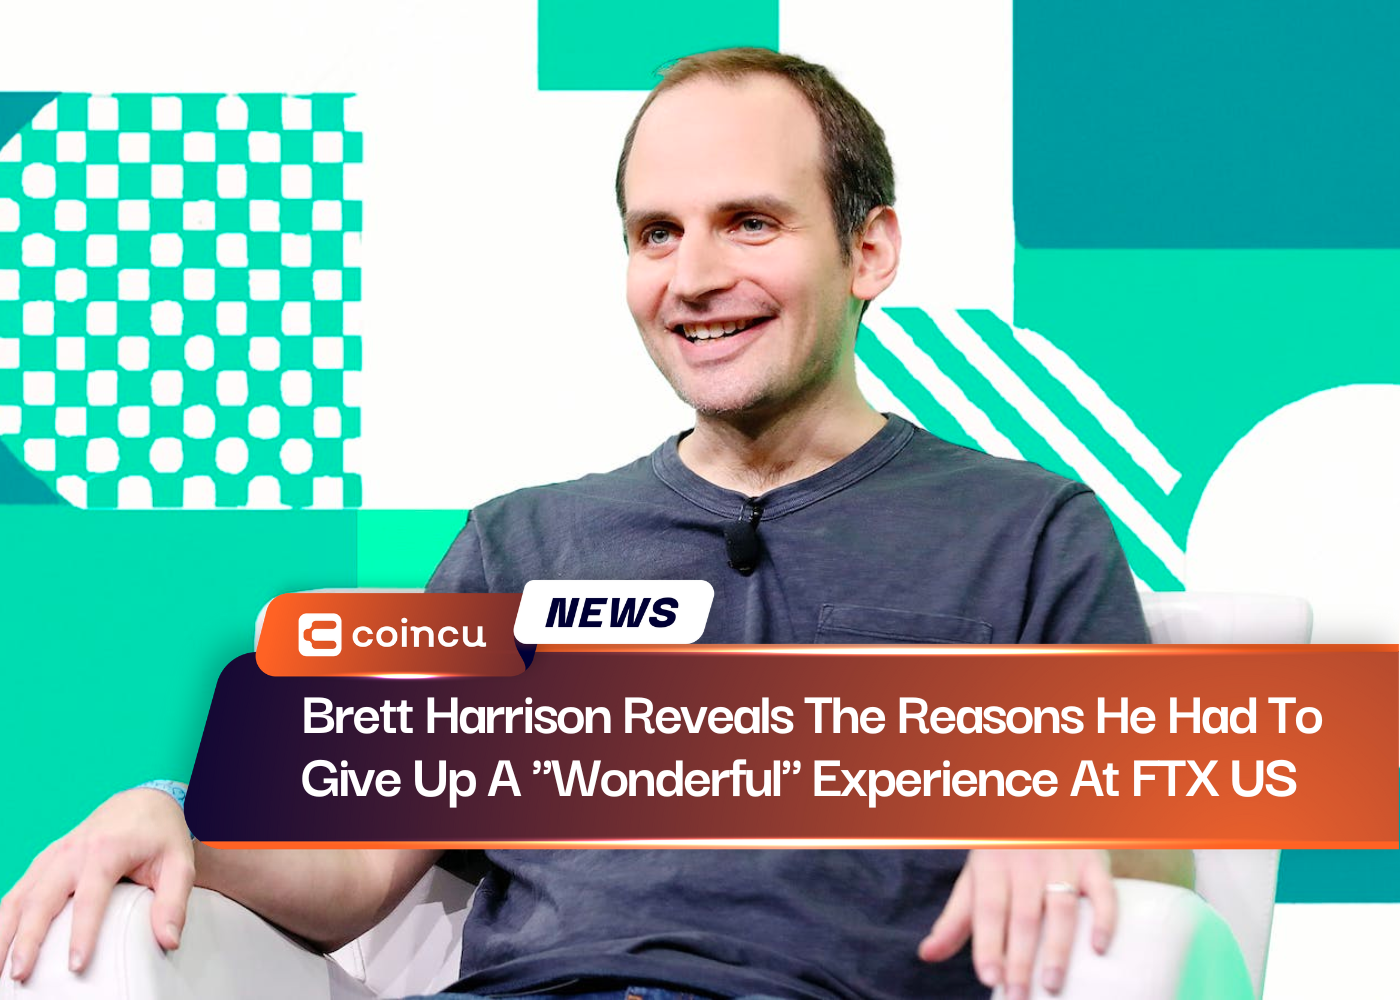 Brett Harrison Reveals The Reasons He Had To Give Up A "Wonderful" Experience At FTX US